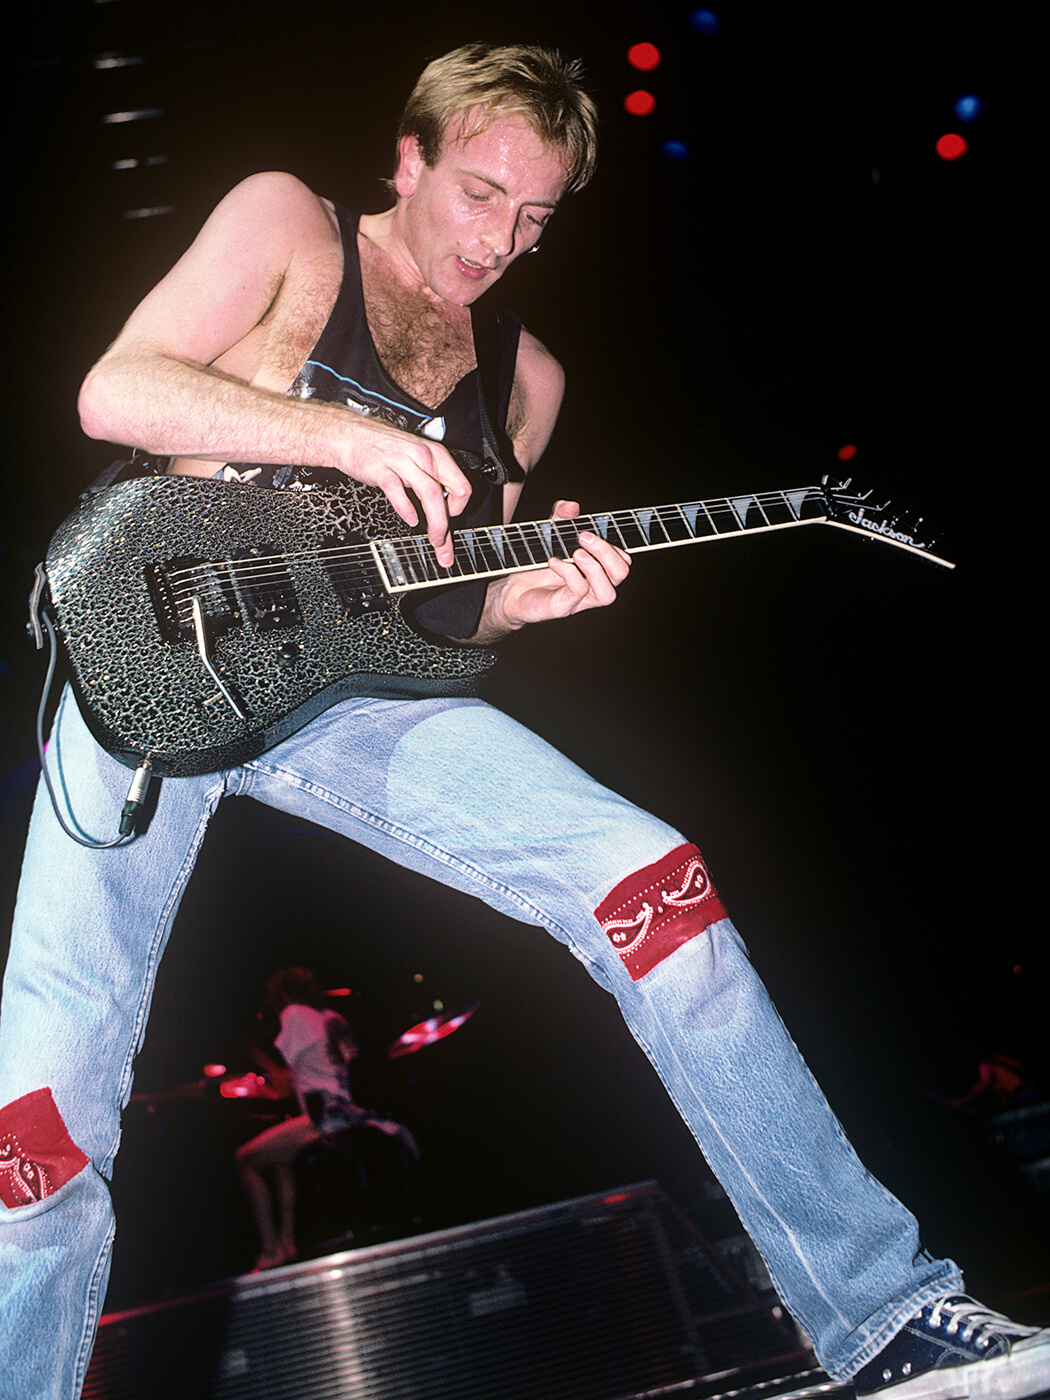 Phil Collen of Def Leppard performing in 1987 with his Jackson guitar with a ‘Cracklejack’ finish, photo by Ebet Roberts/Redferns via Getty Images